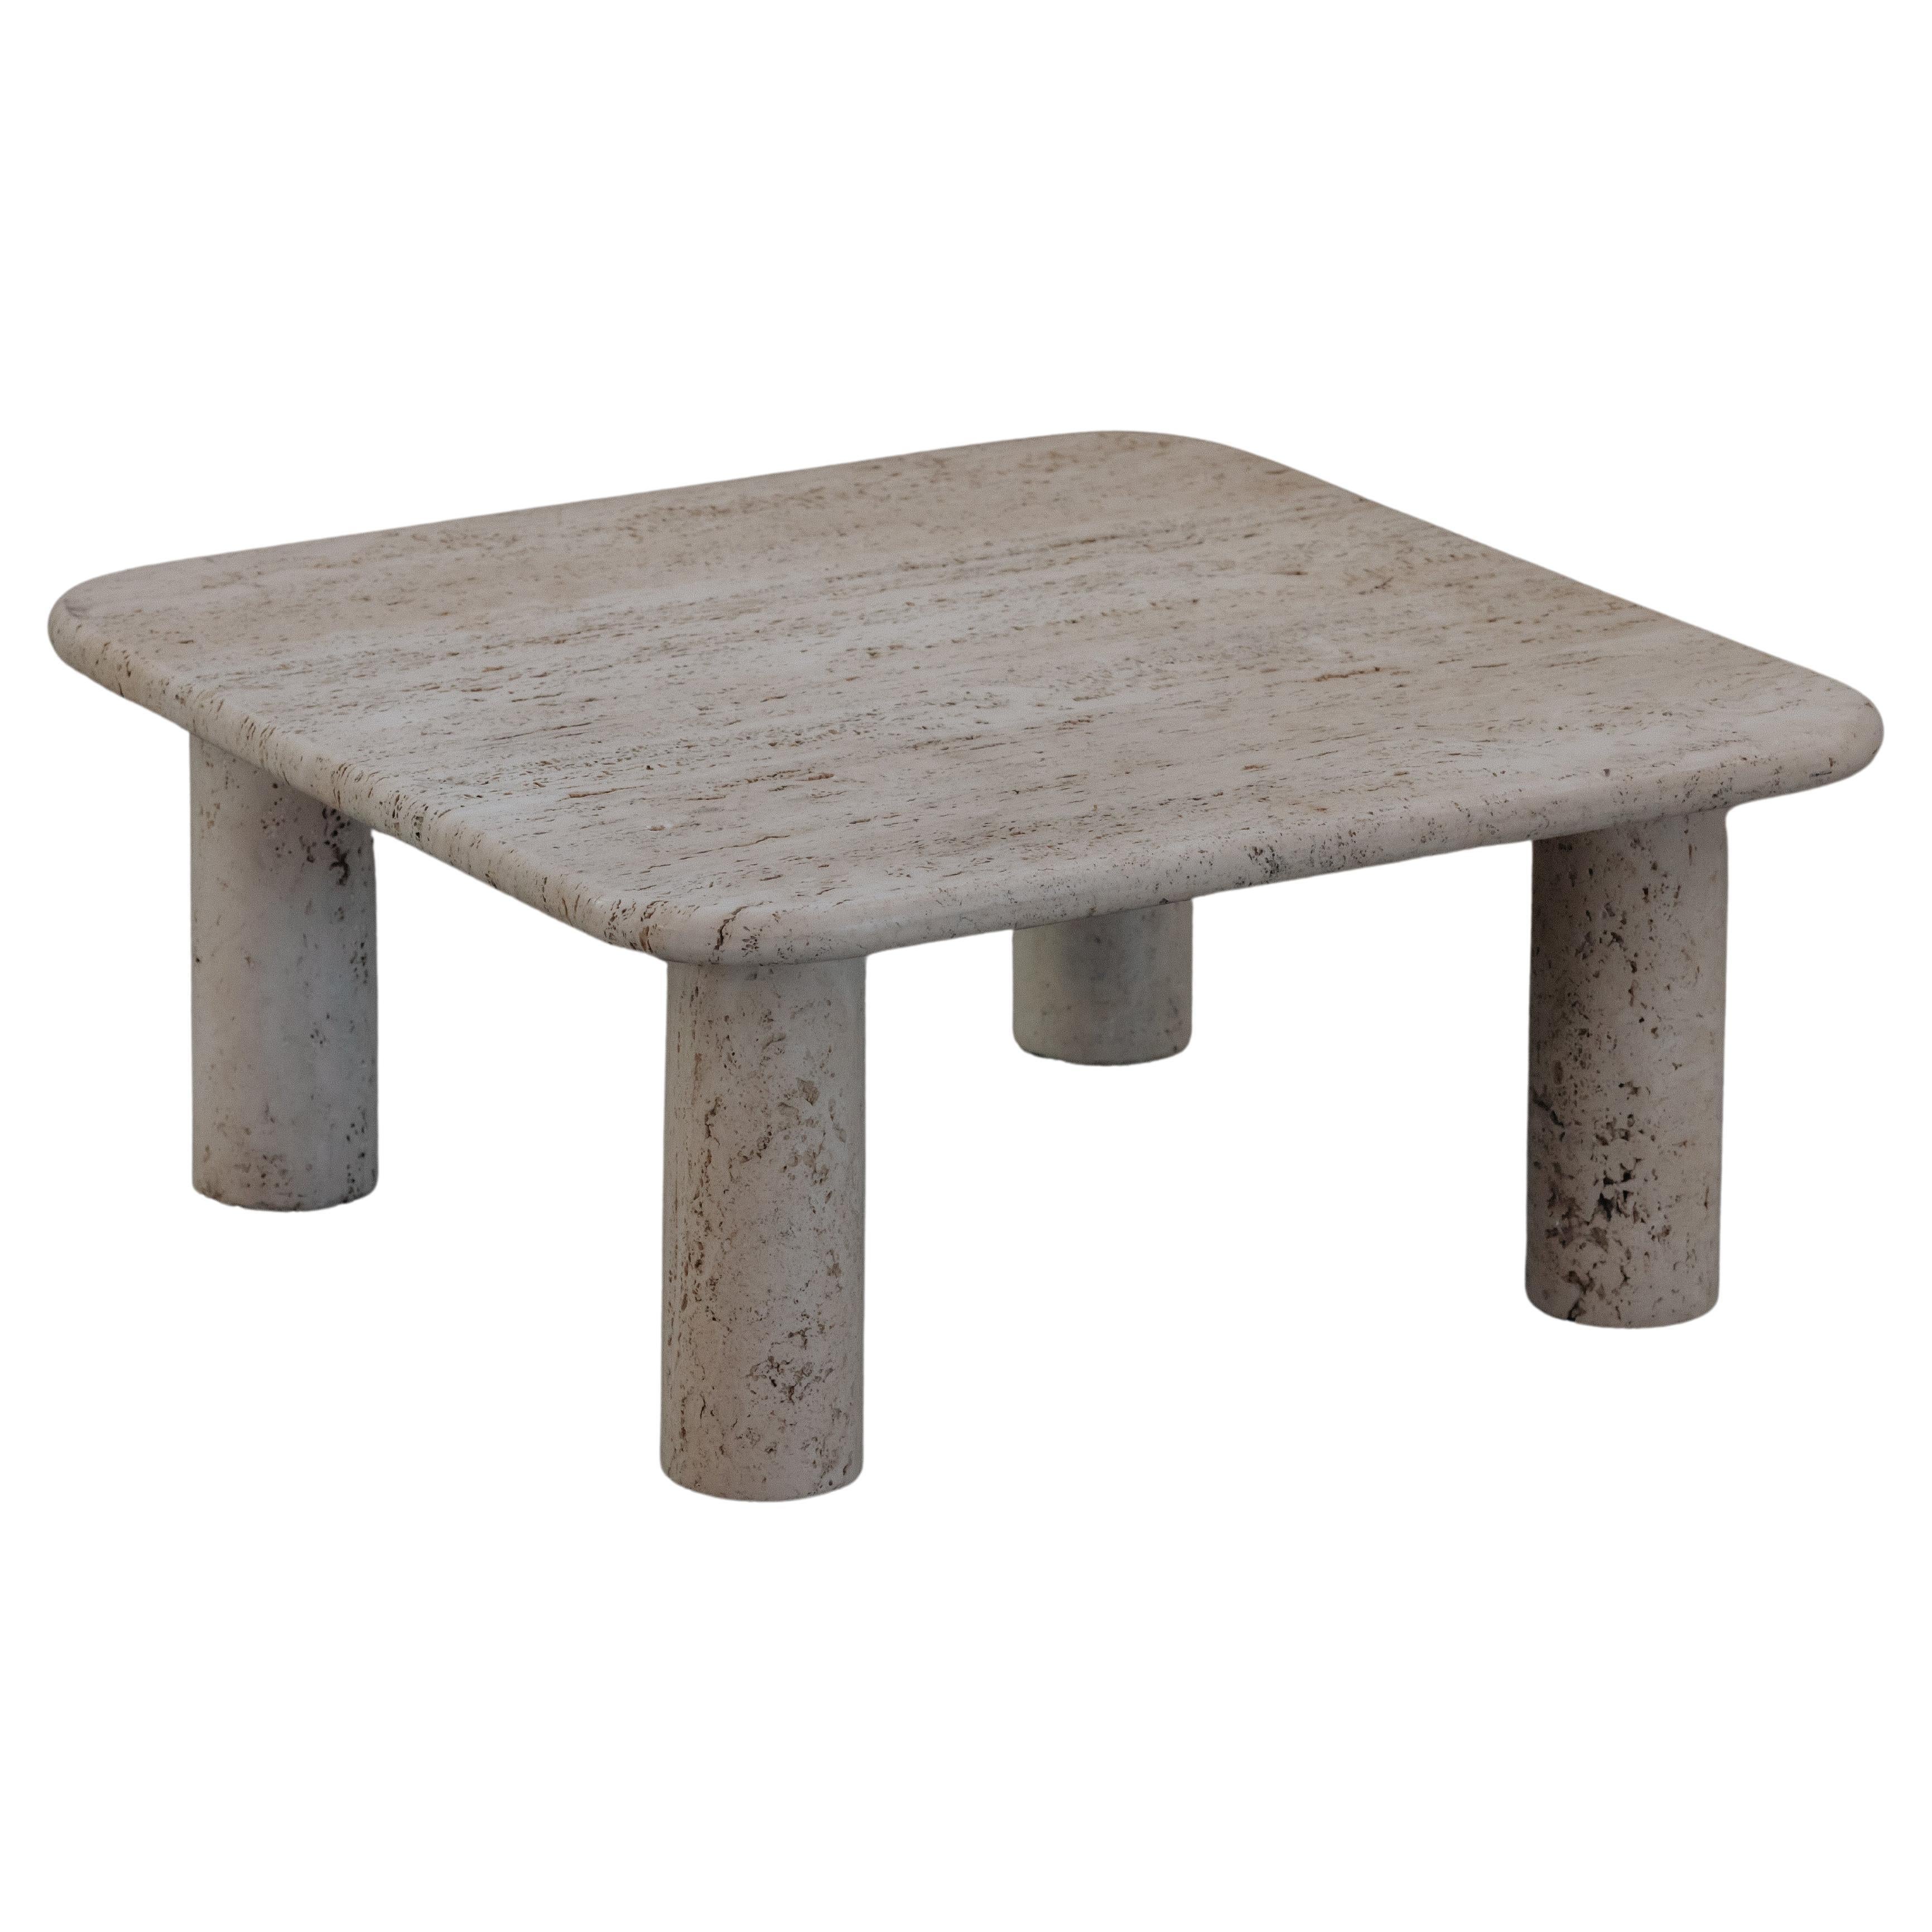 Vintage Travertine Coffee Table From France, Circa 1970 For Sale